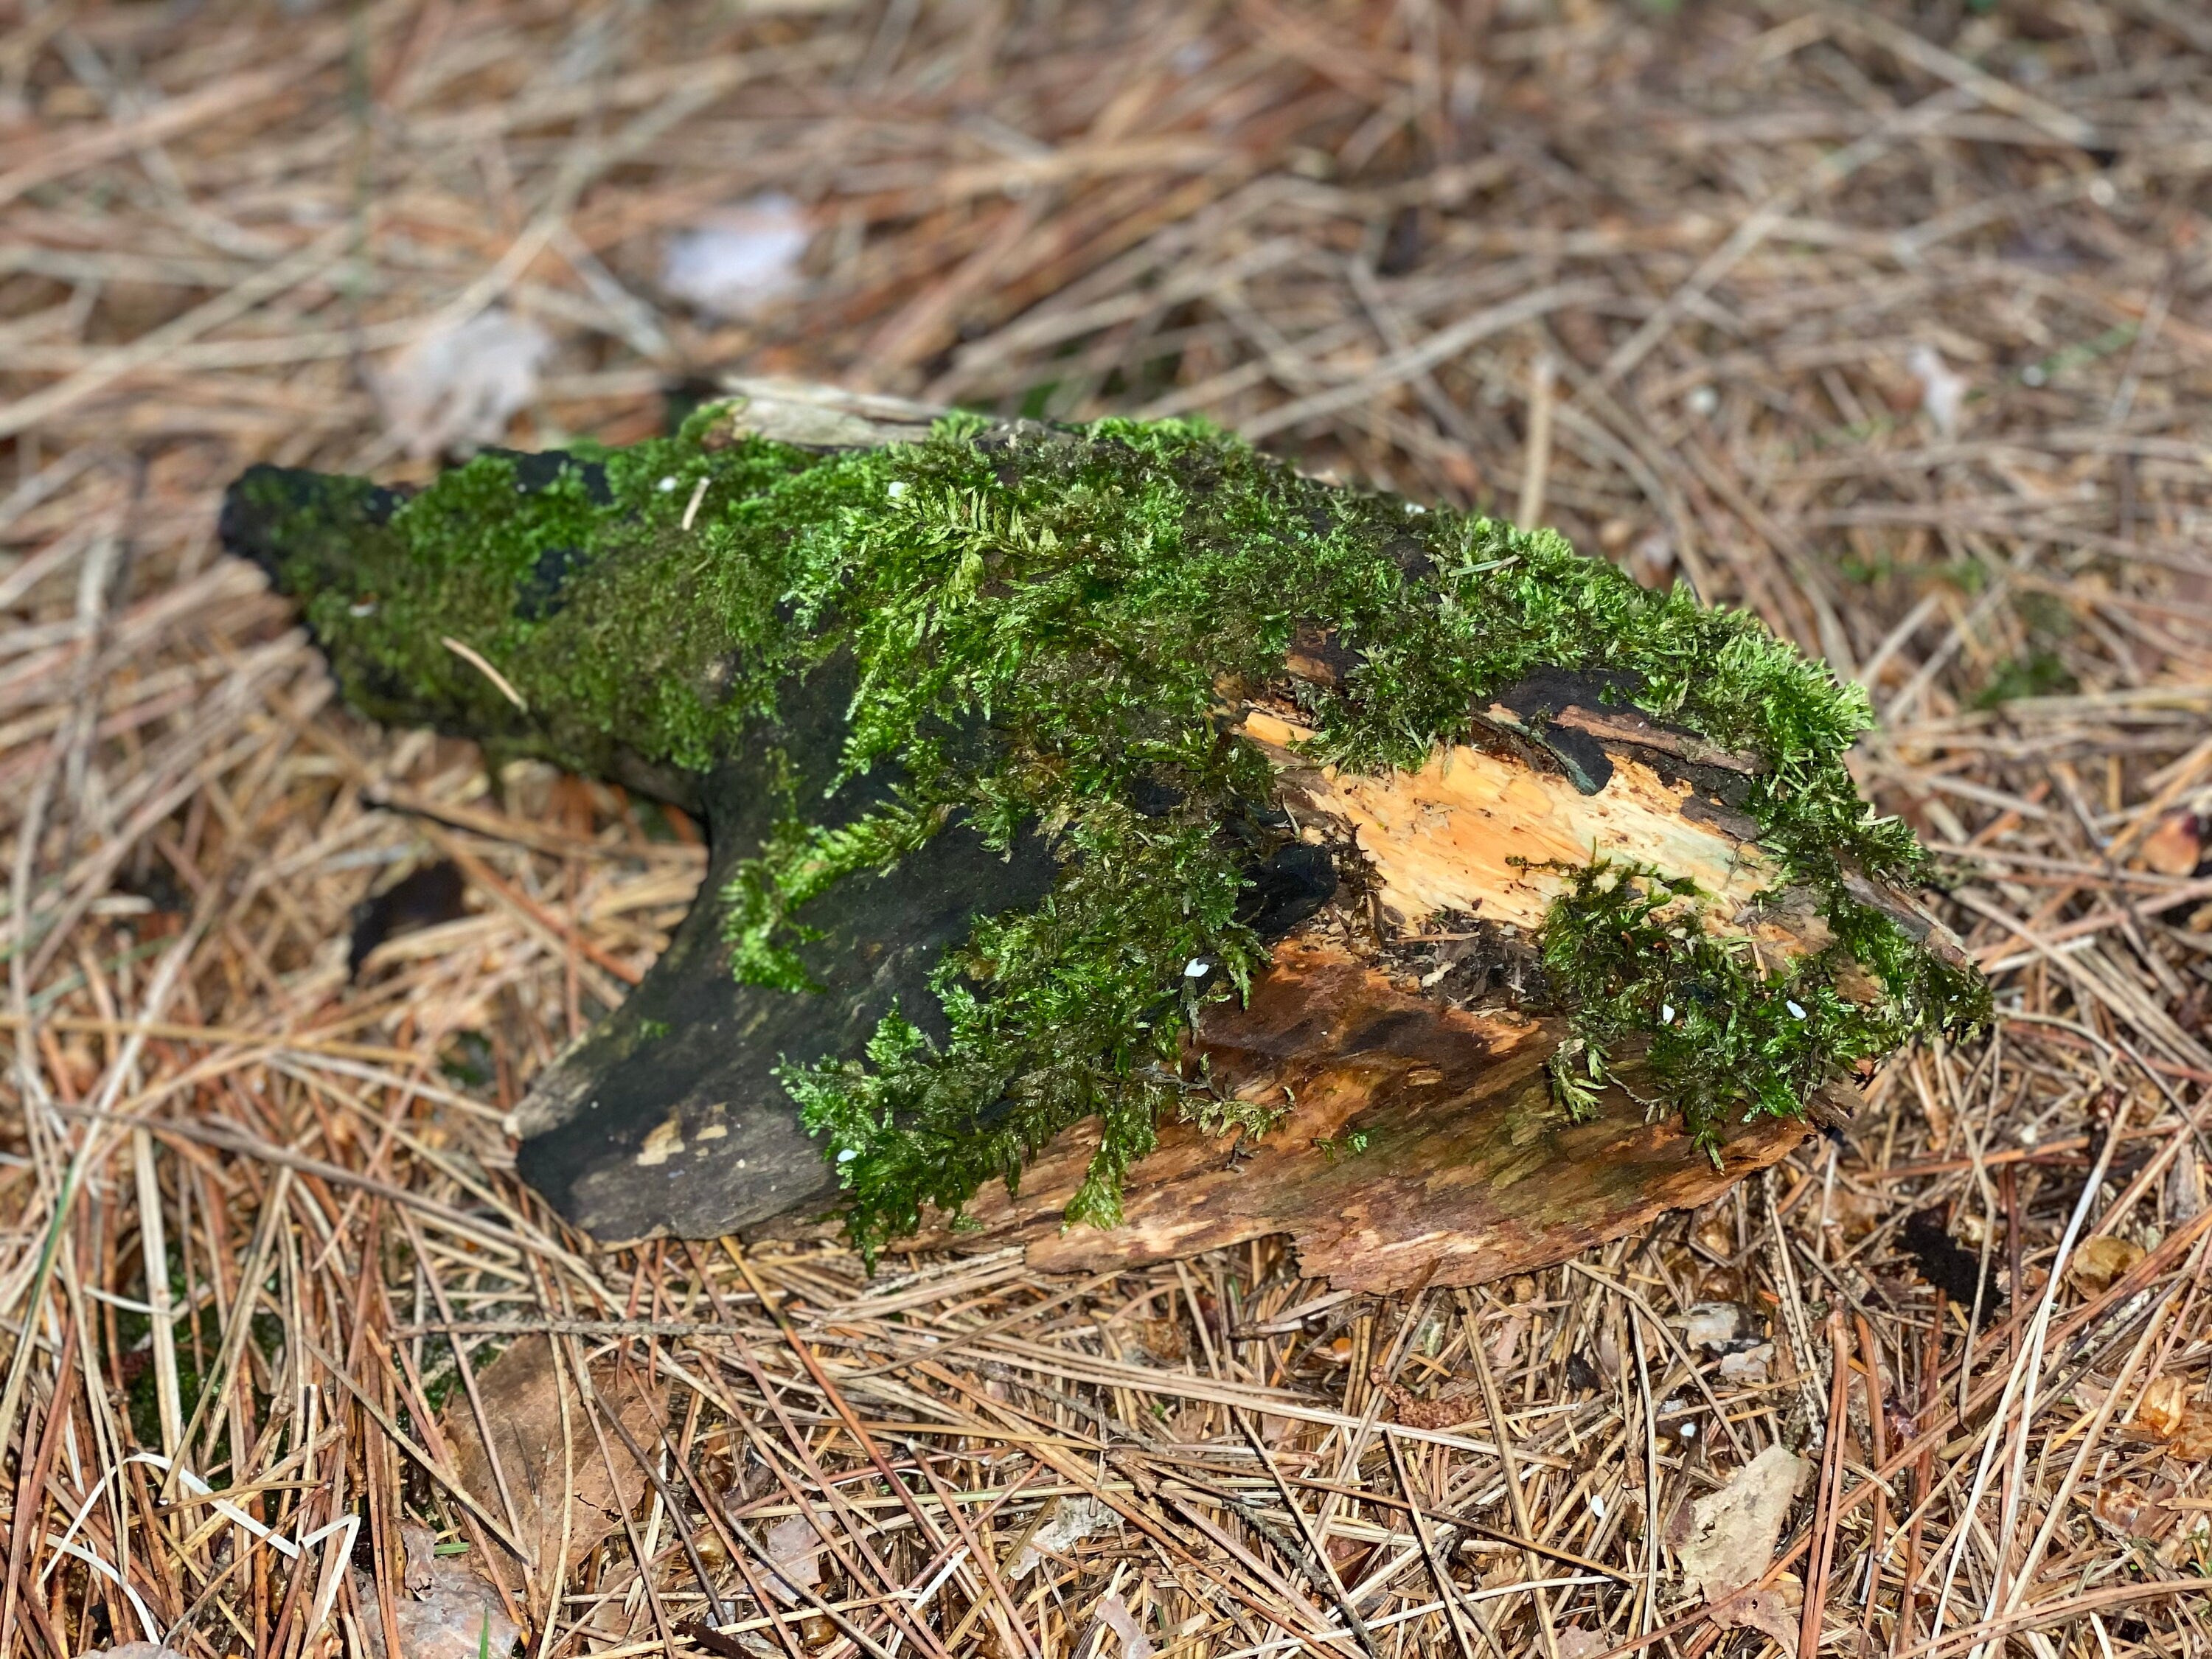 Mossy Log, Live Fresh Moss on a Log, Approximately 10 Inches Long by 5 Inches Wide by 3 Inches Tall